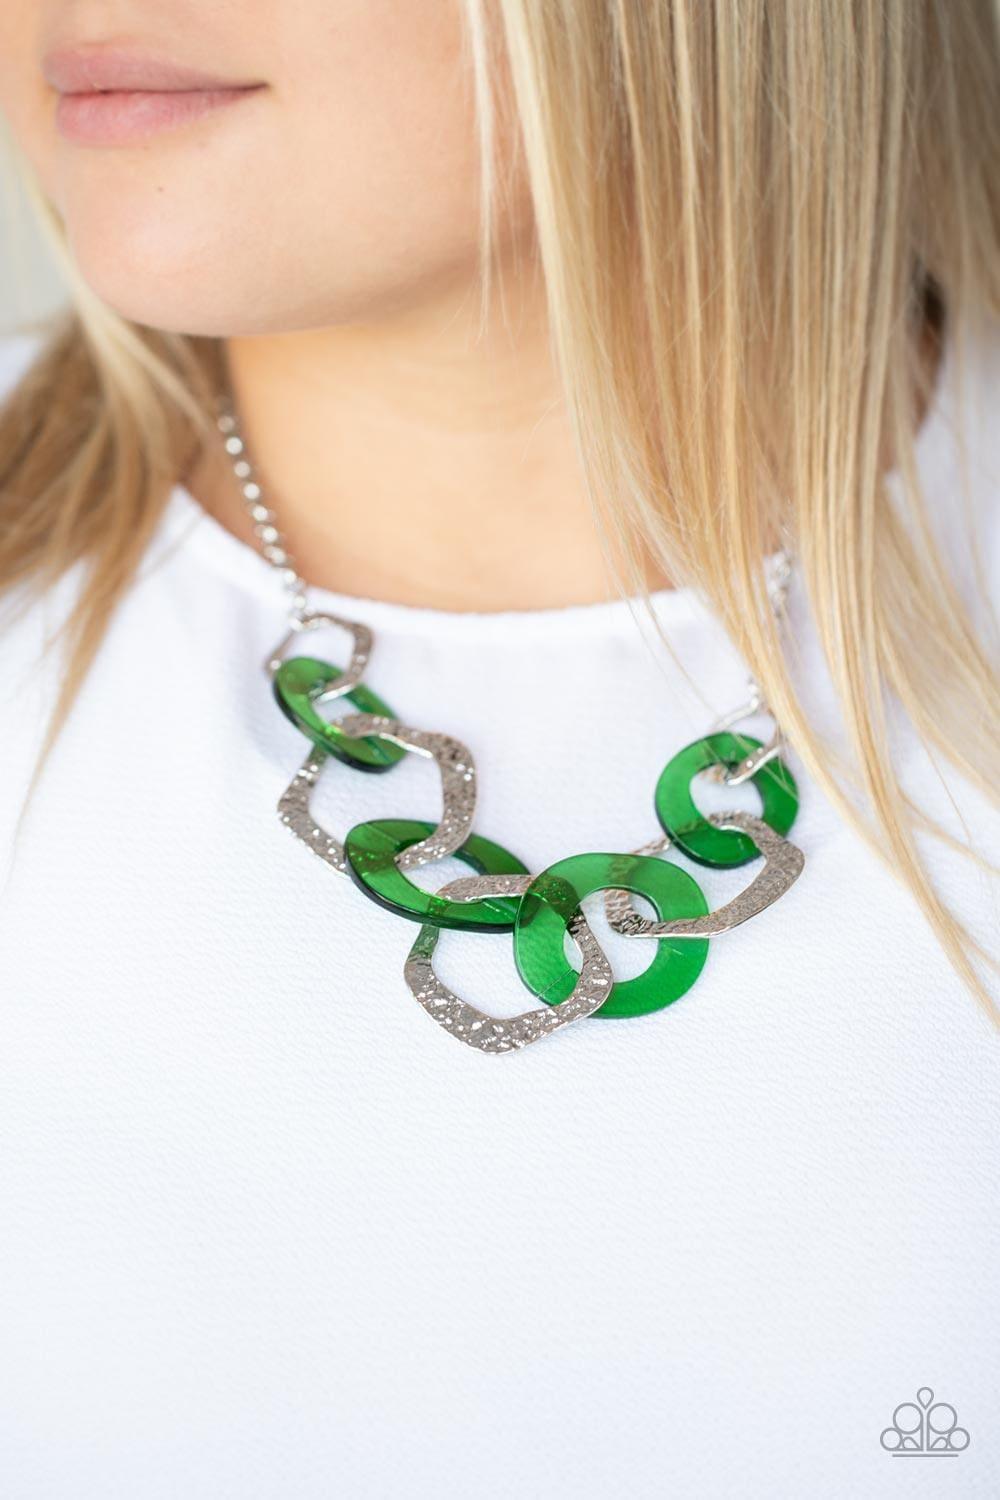 Paparazzi Accessories - Urban Circus - Green Necklace - Bling by JessieK